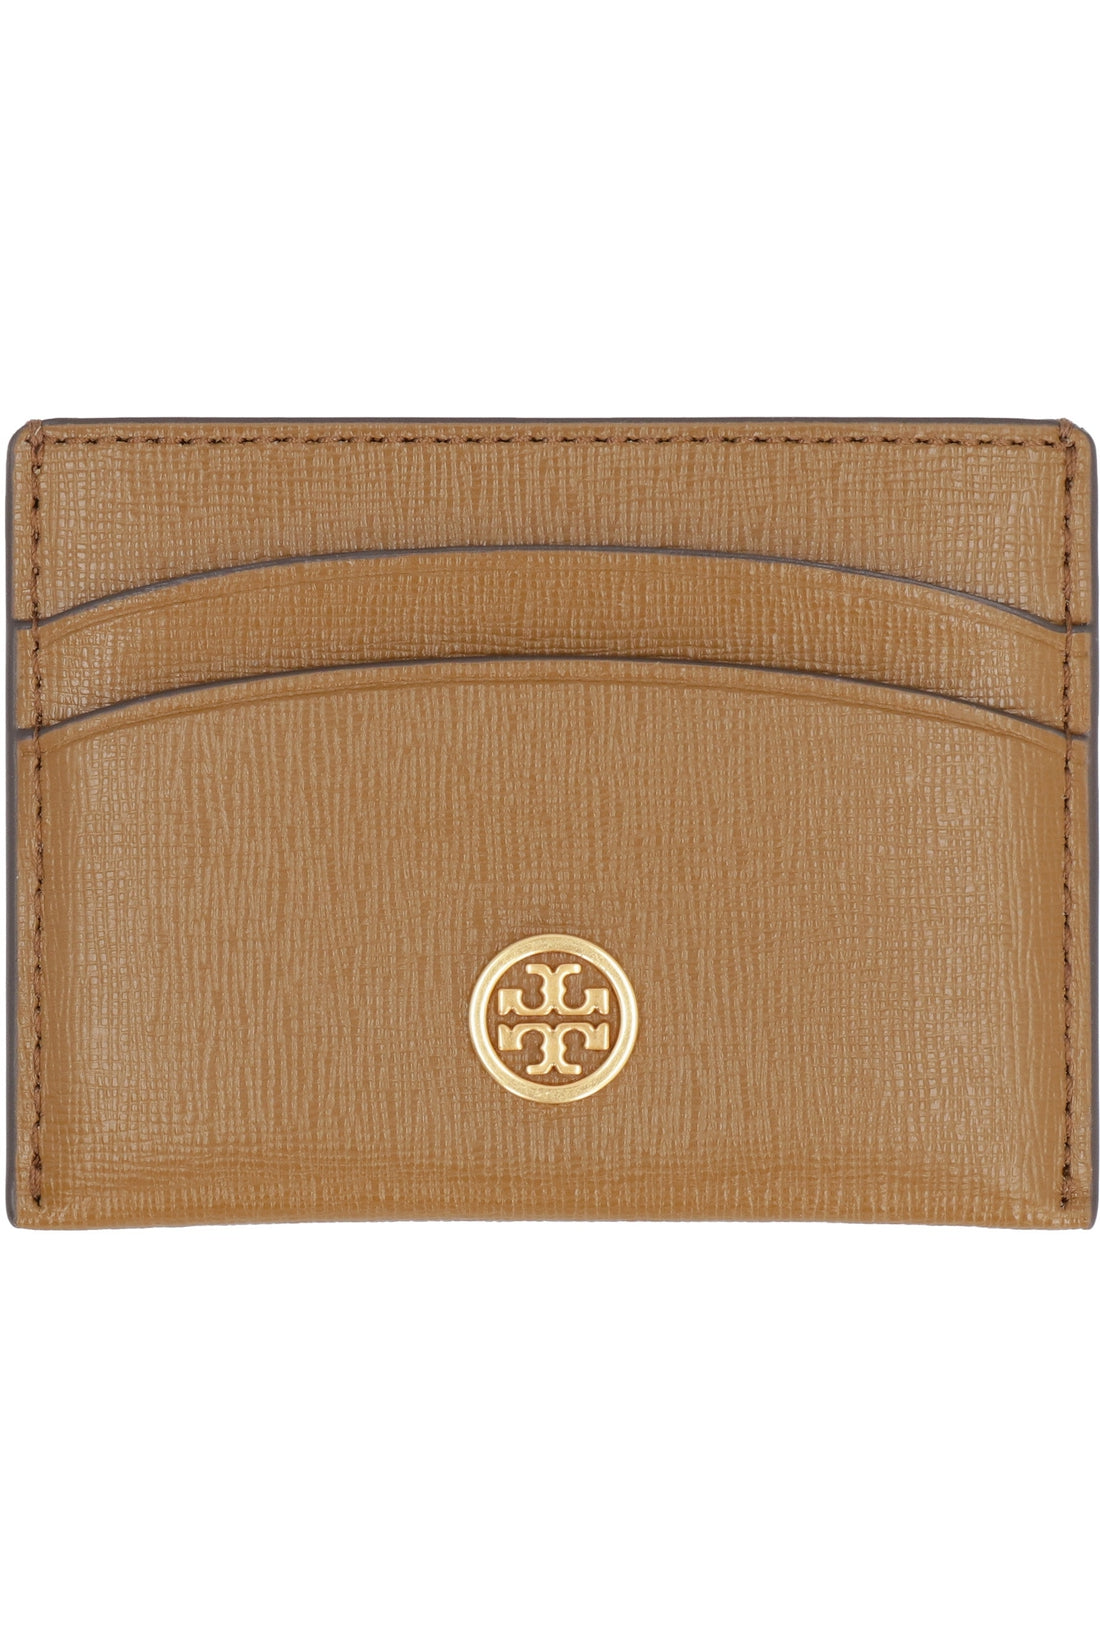 Tory Burch-OUTLET-SALE-Robinson leather card holder-ARCHIVIST